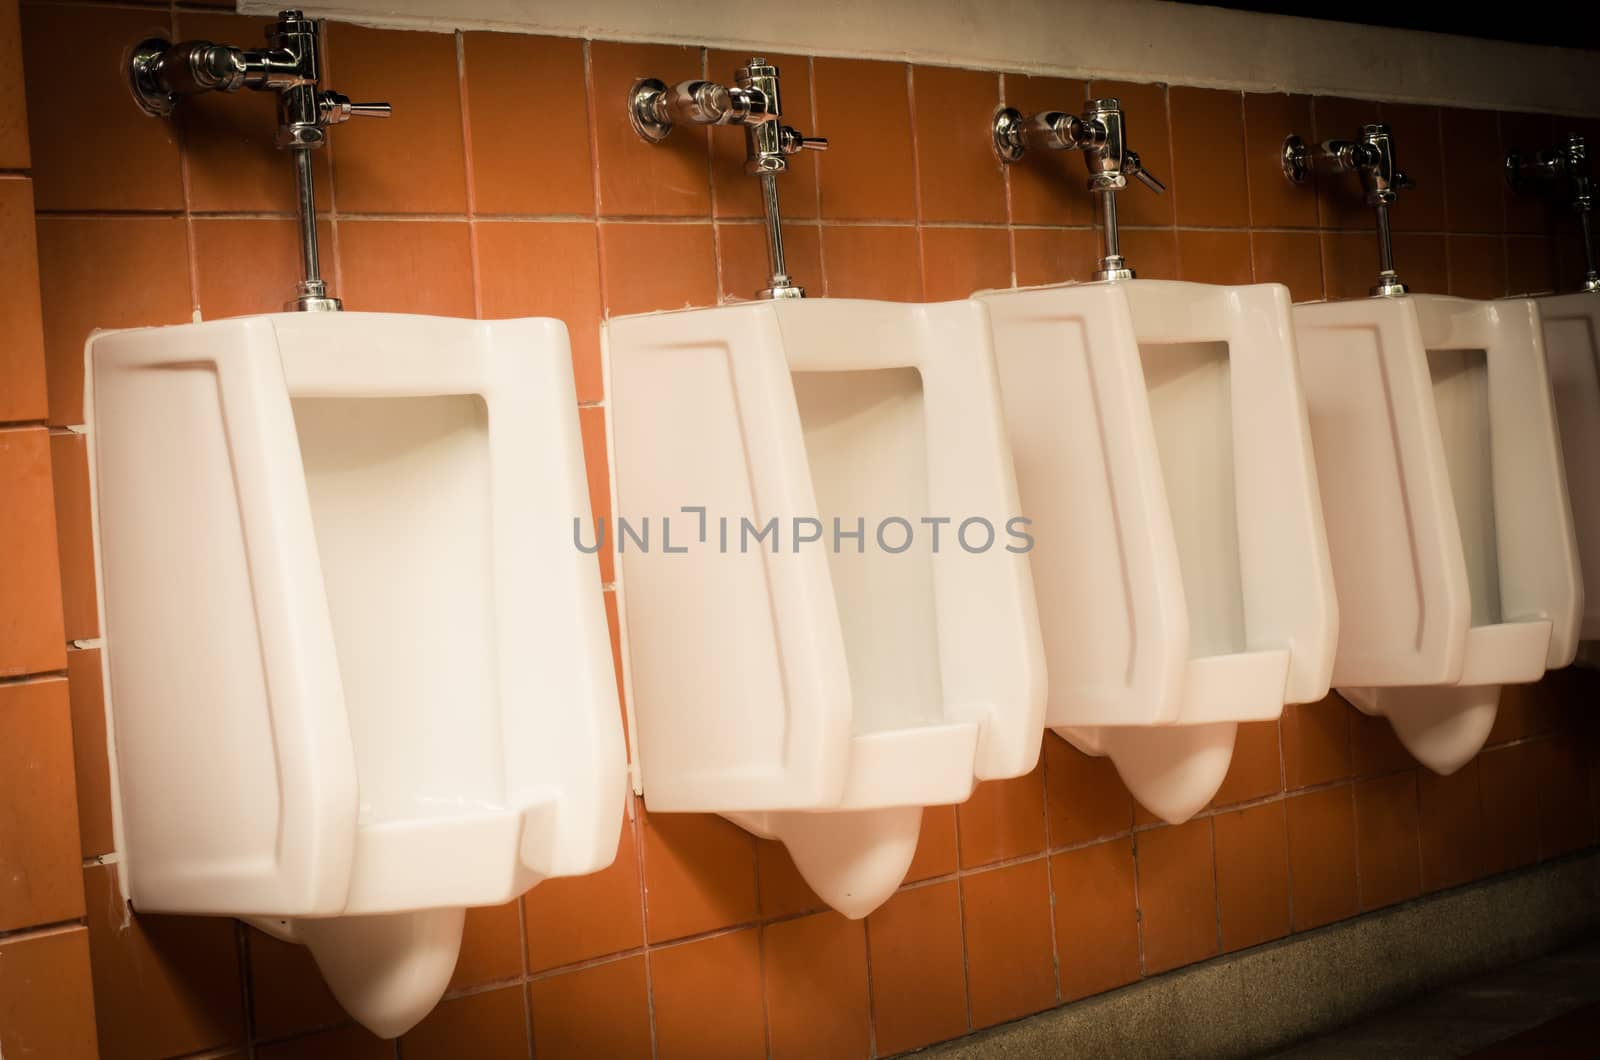 Many in the men's room urinal. by photobyphotoboy